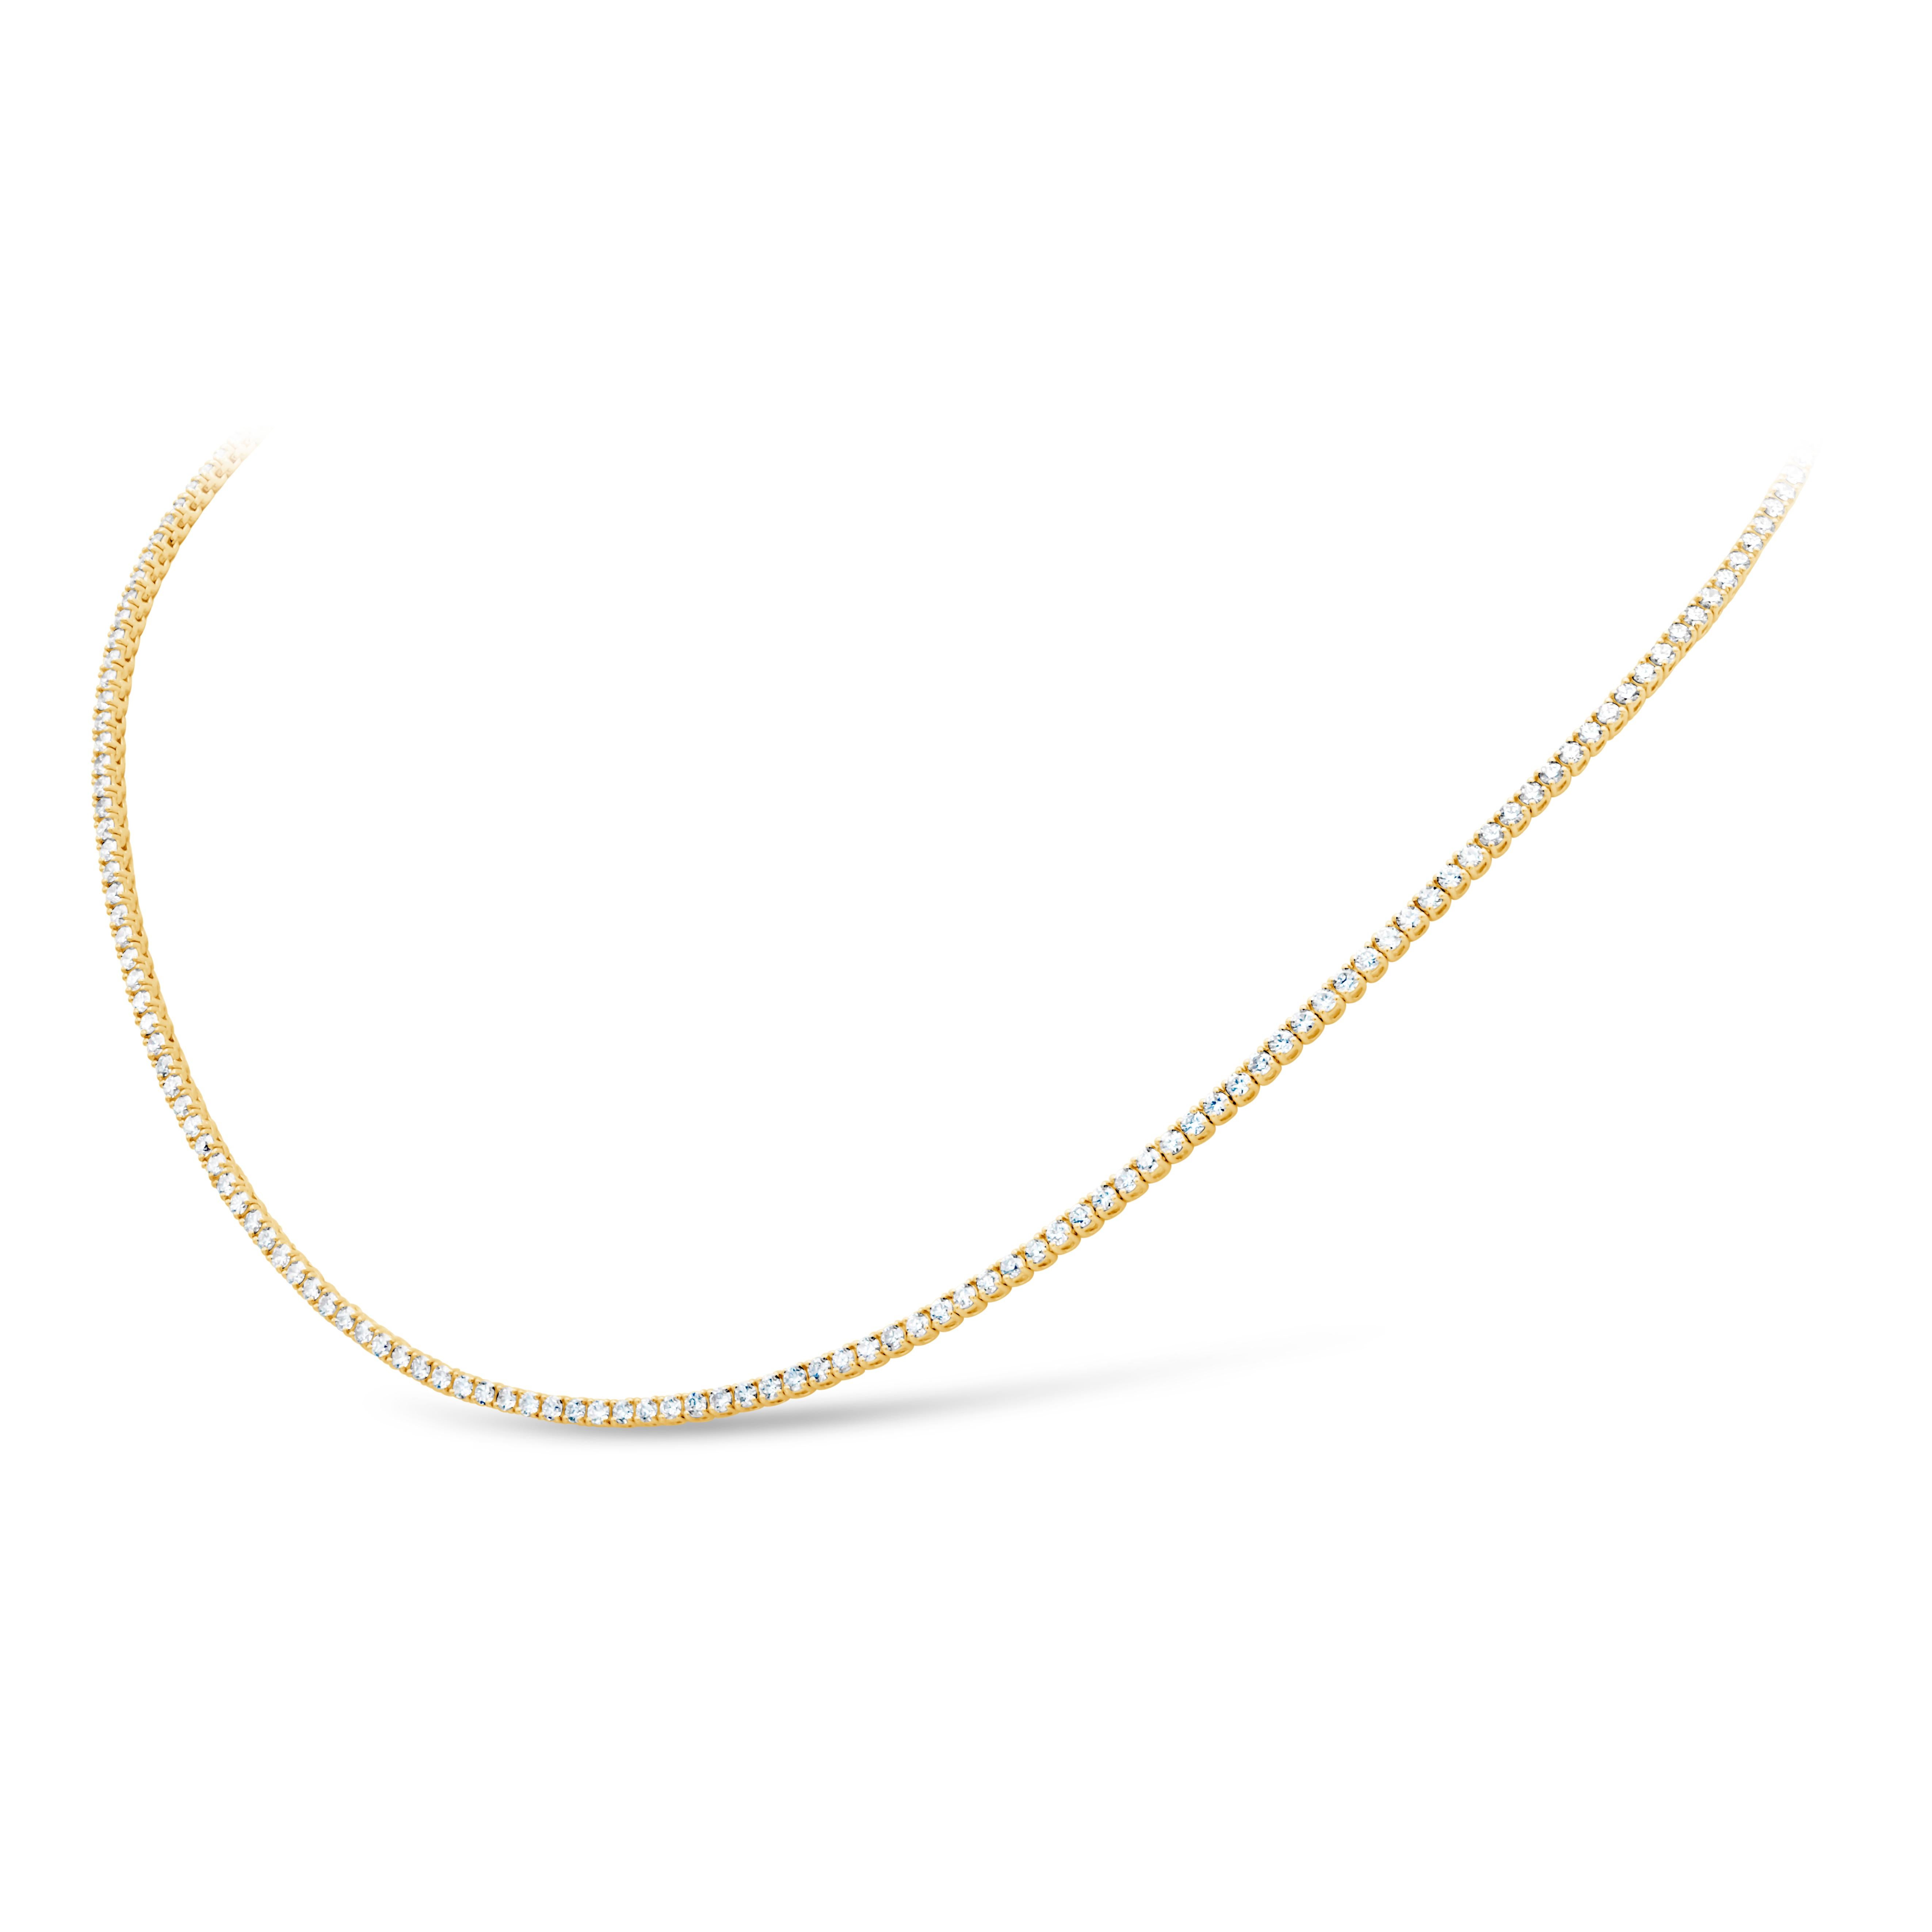 This fine dazzling tennis necklace features a row of brilliant round shape diamonds weighing 3.86 carats total, G-H Color and VS-SI1 in Clarity. Set in a classic four-prong setting and finely crafted in 18K yellow gold. 16 inches in length.

Style